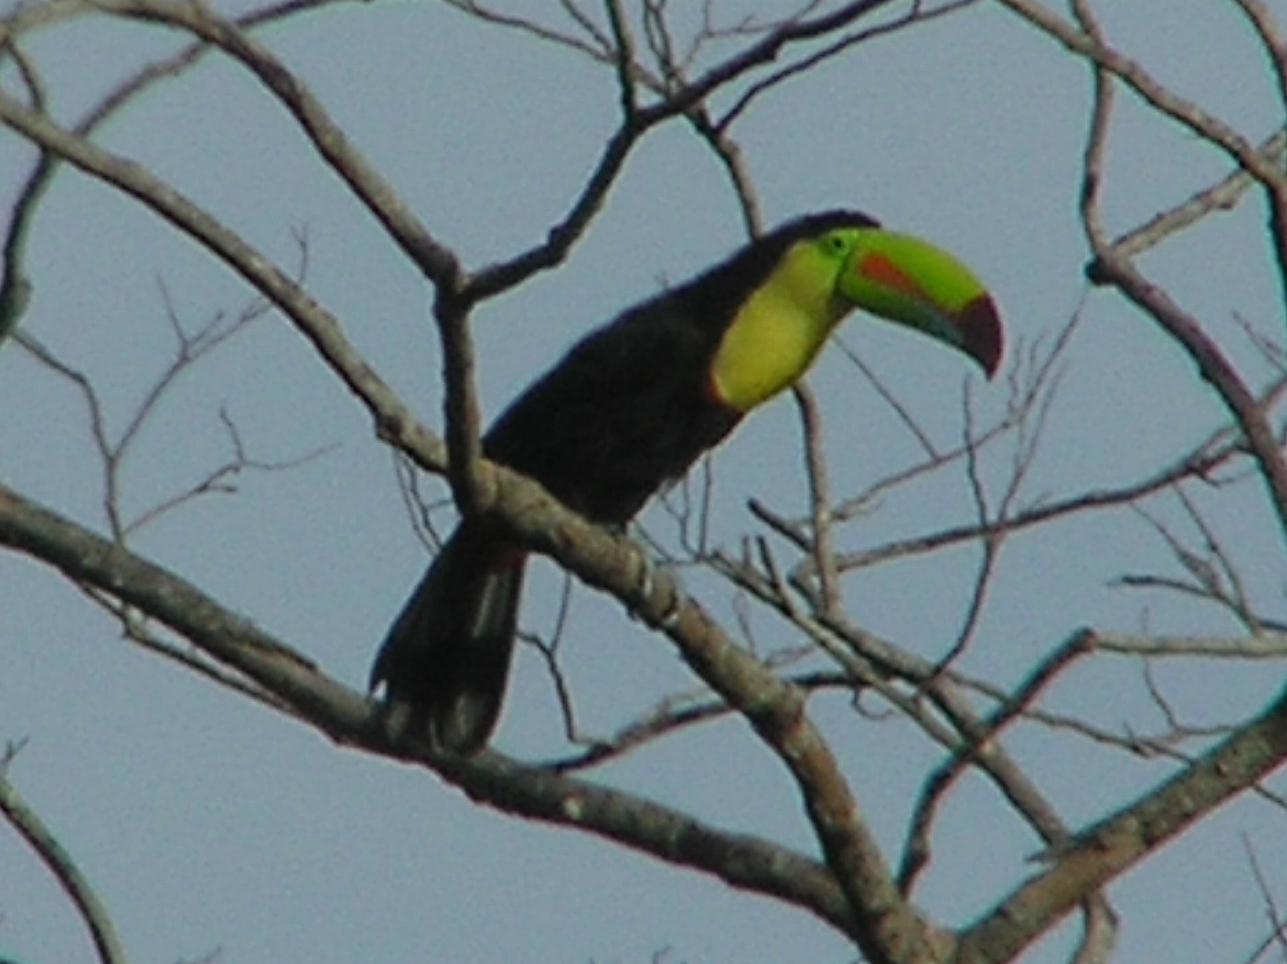 Click picture to see more Keel-billed Toucan photos.